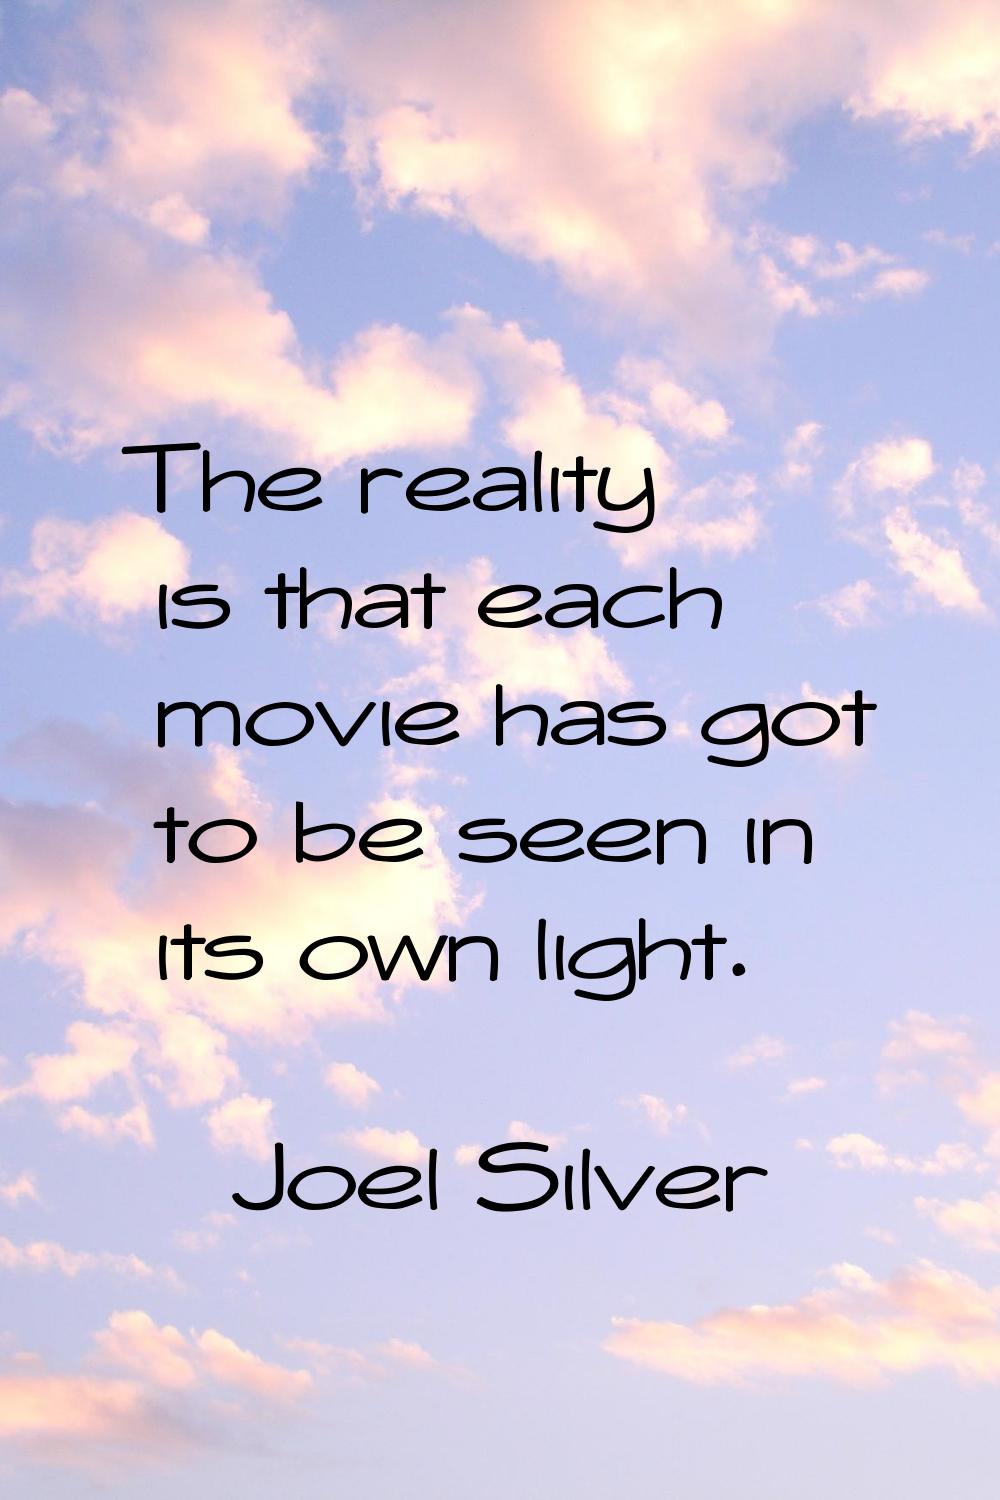 The reality is that each movie has got to be seen in its own light.